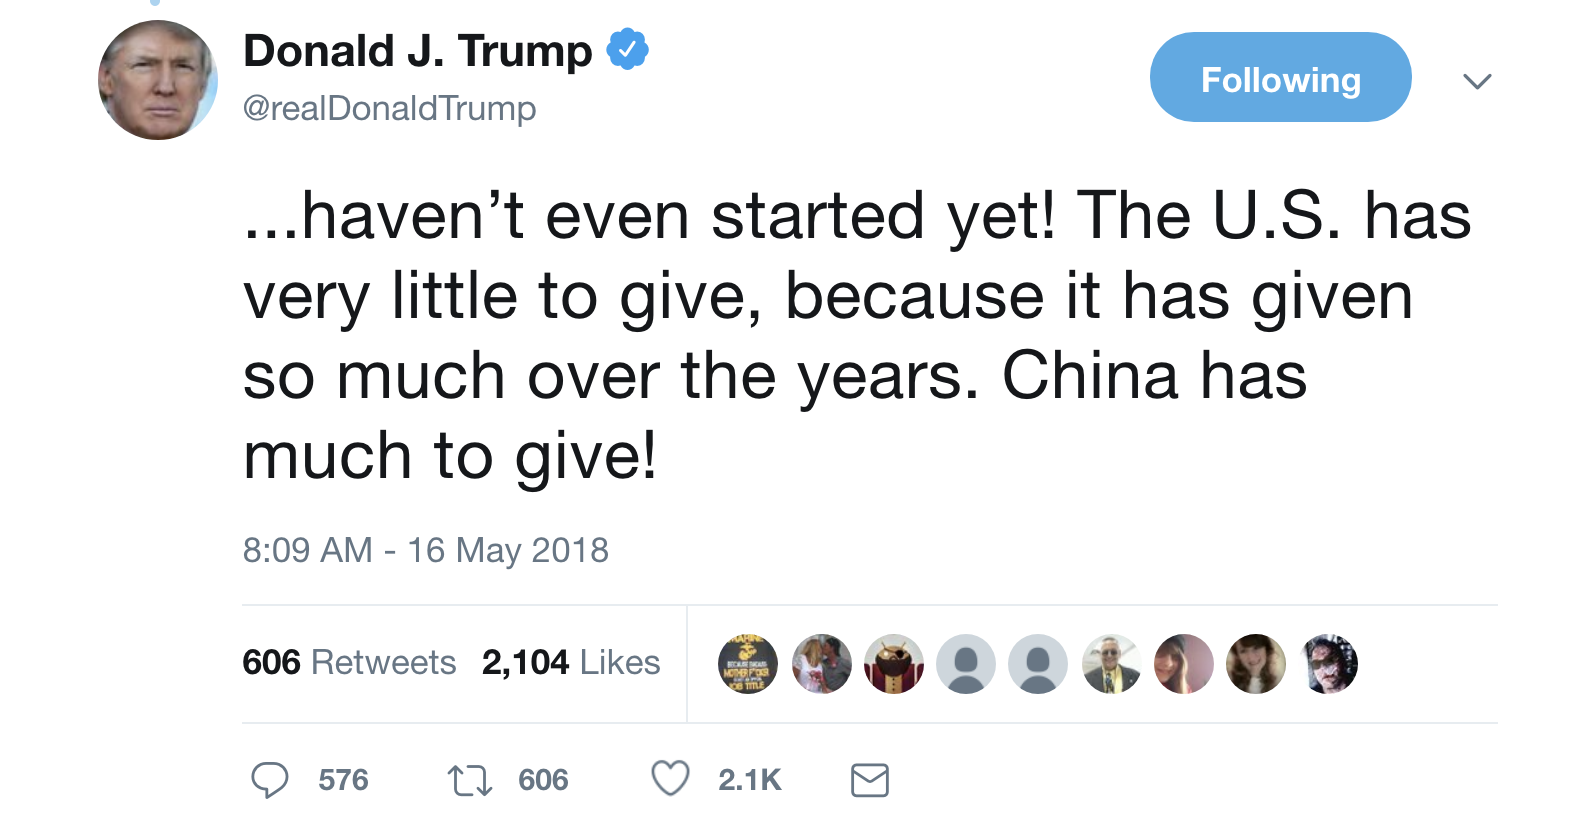 Screen-Shot-2018-05-16-at-8.16.07-AM Trump Responds To $500 Million China Gift Scandal On Twitter Like A Traitor To U.S. Corruption Crime Donald Trump Foreign Policy Politics Top Stories 